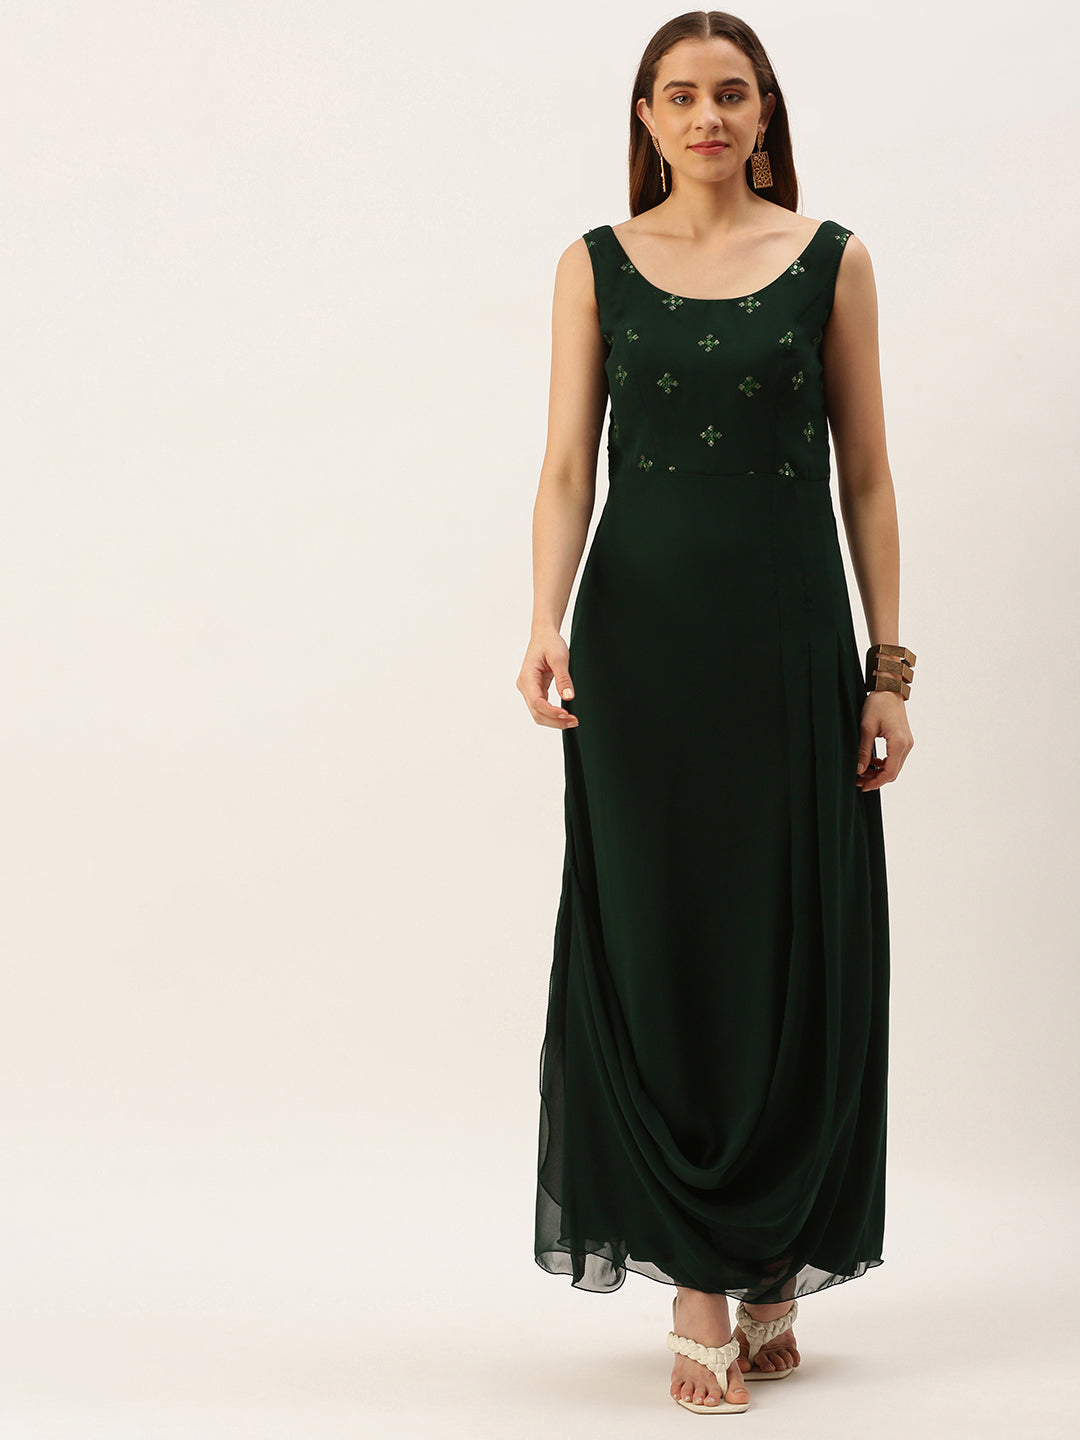 Green-Embroidered-Dress